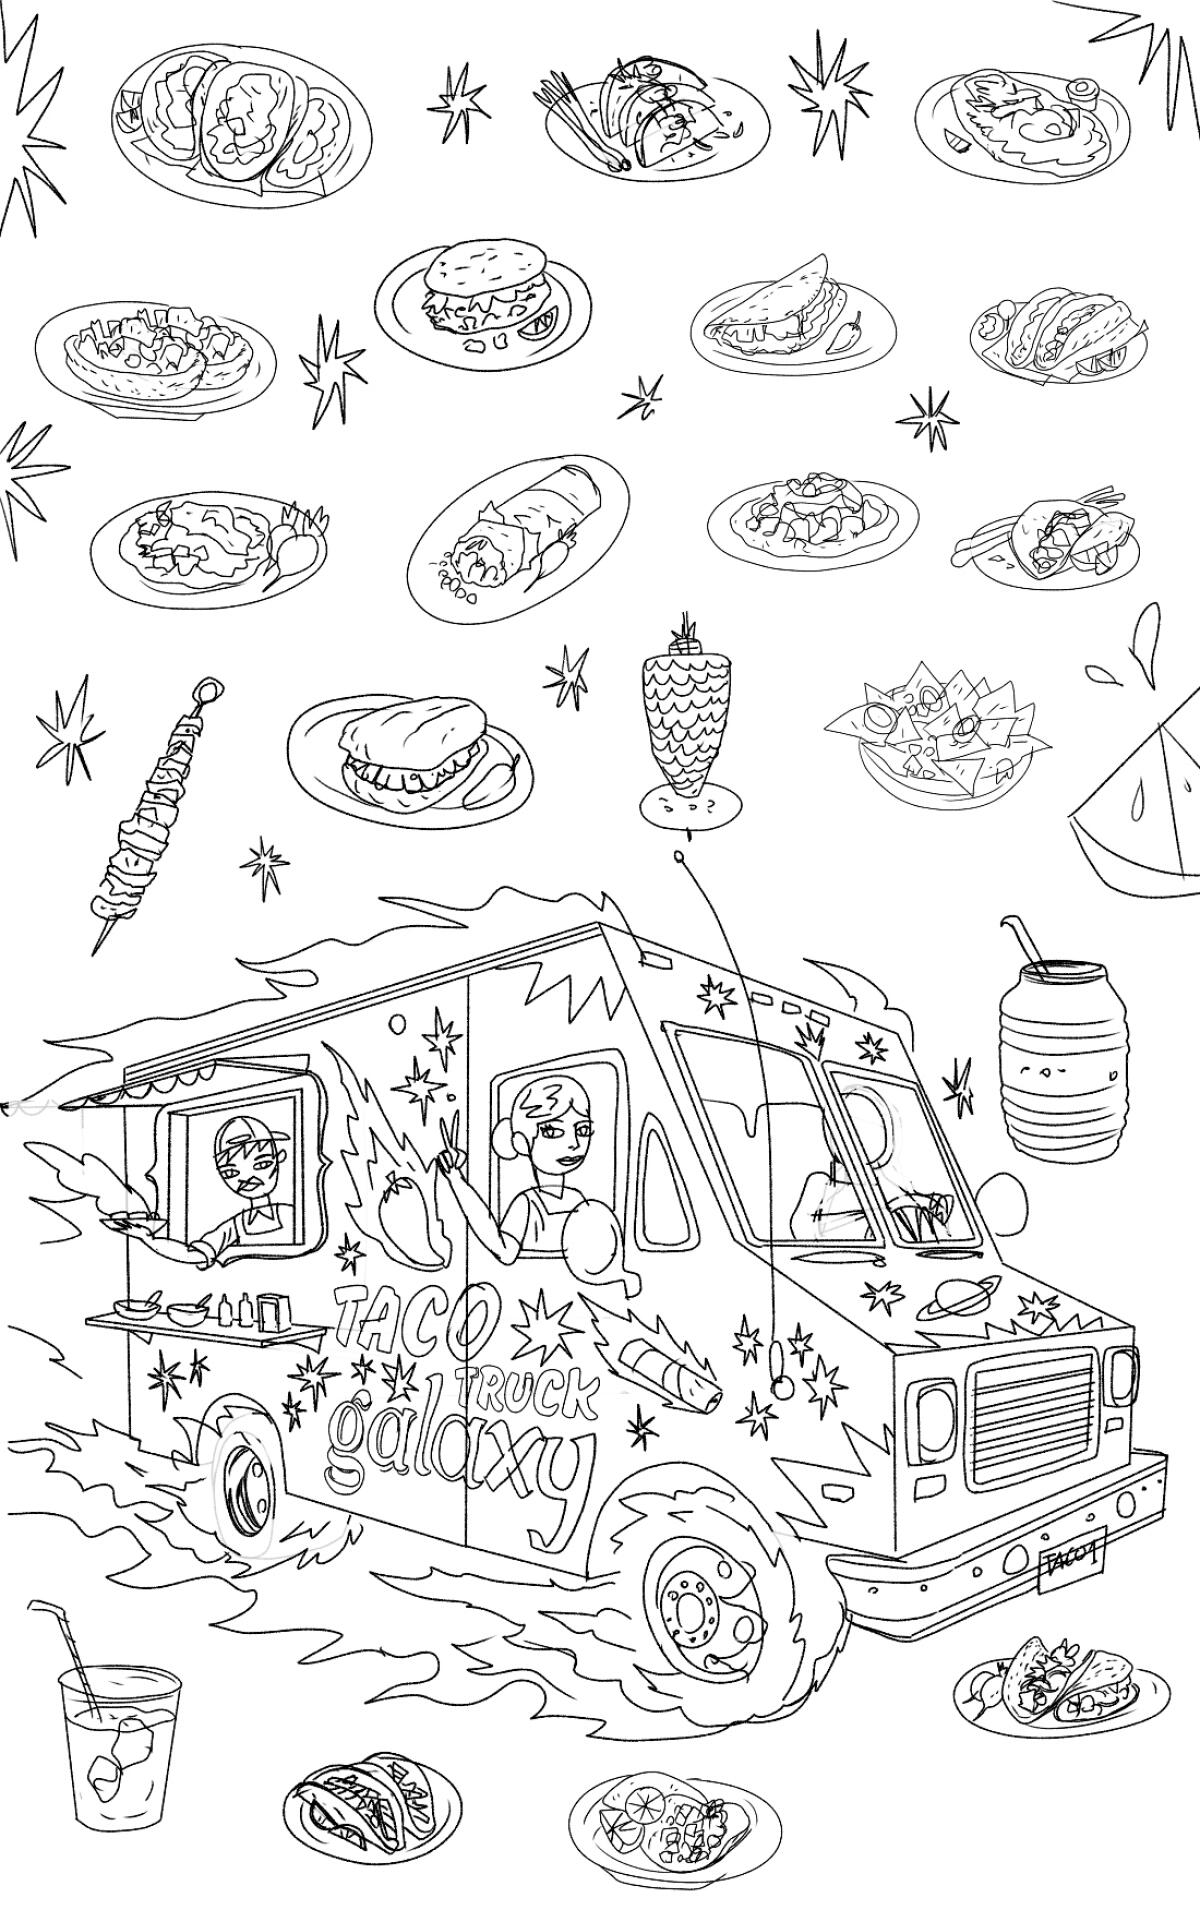 Los Angeles Times Food illustrations, "Into the belly of the L.A. taco truck," Charles Glaubitz, May 23, 2019.